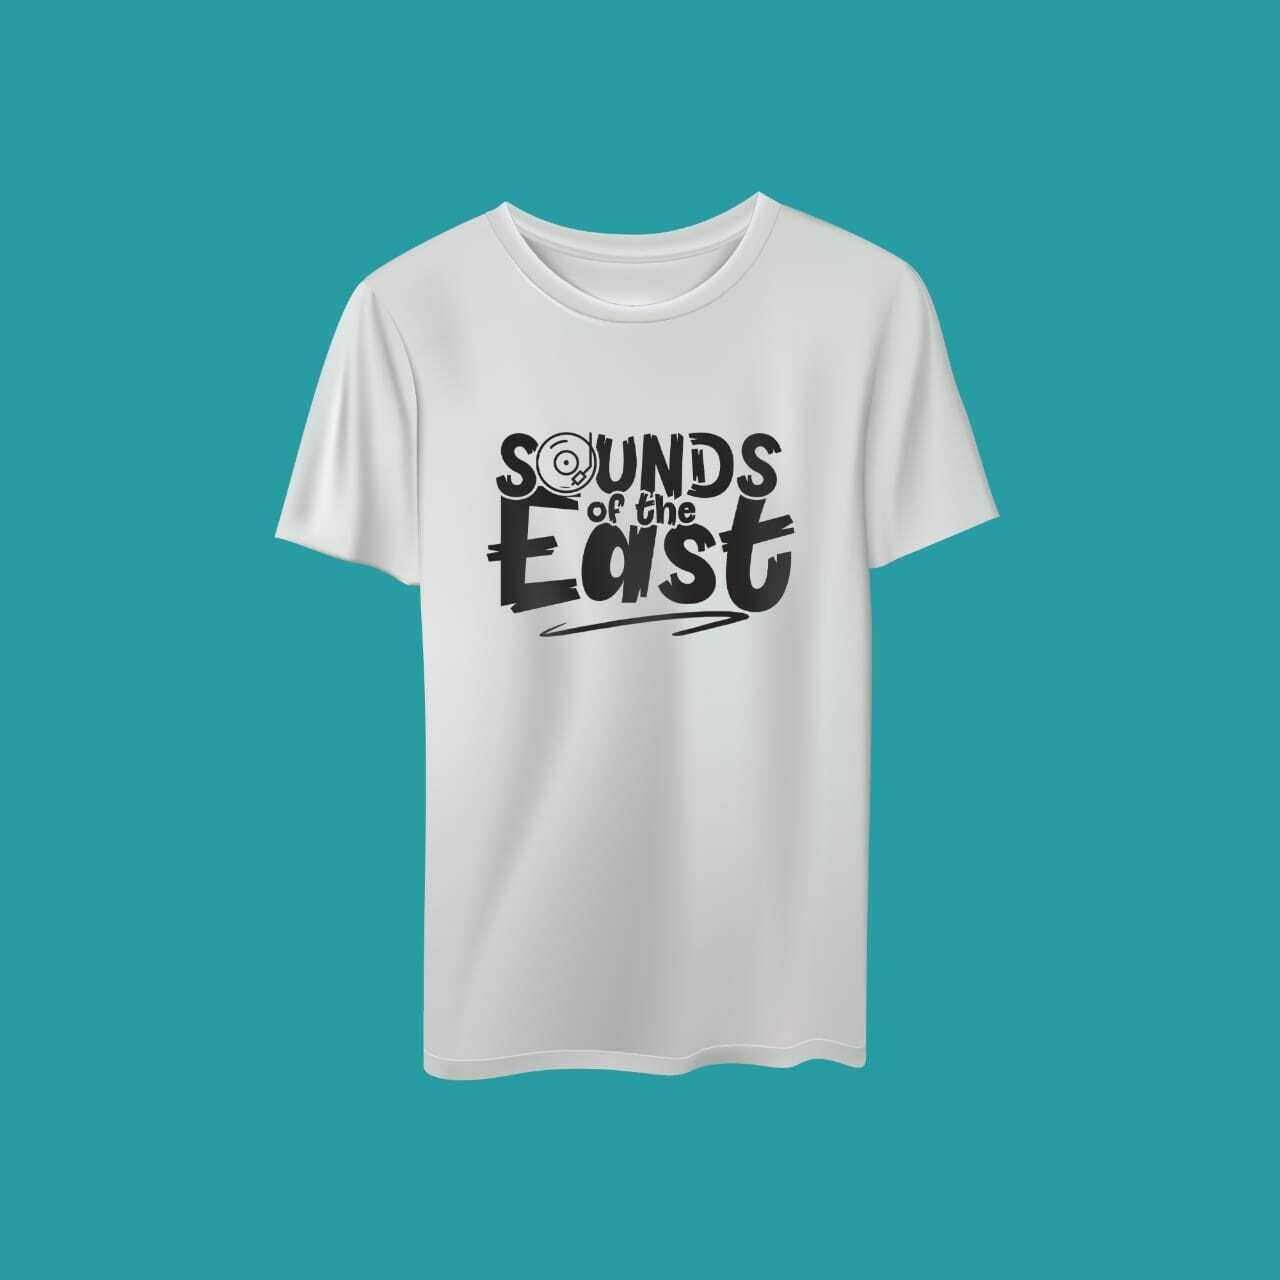 Sounds of the East Tee White